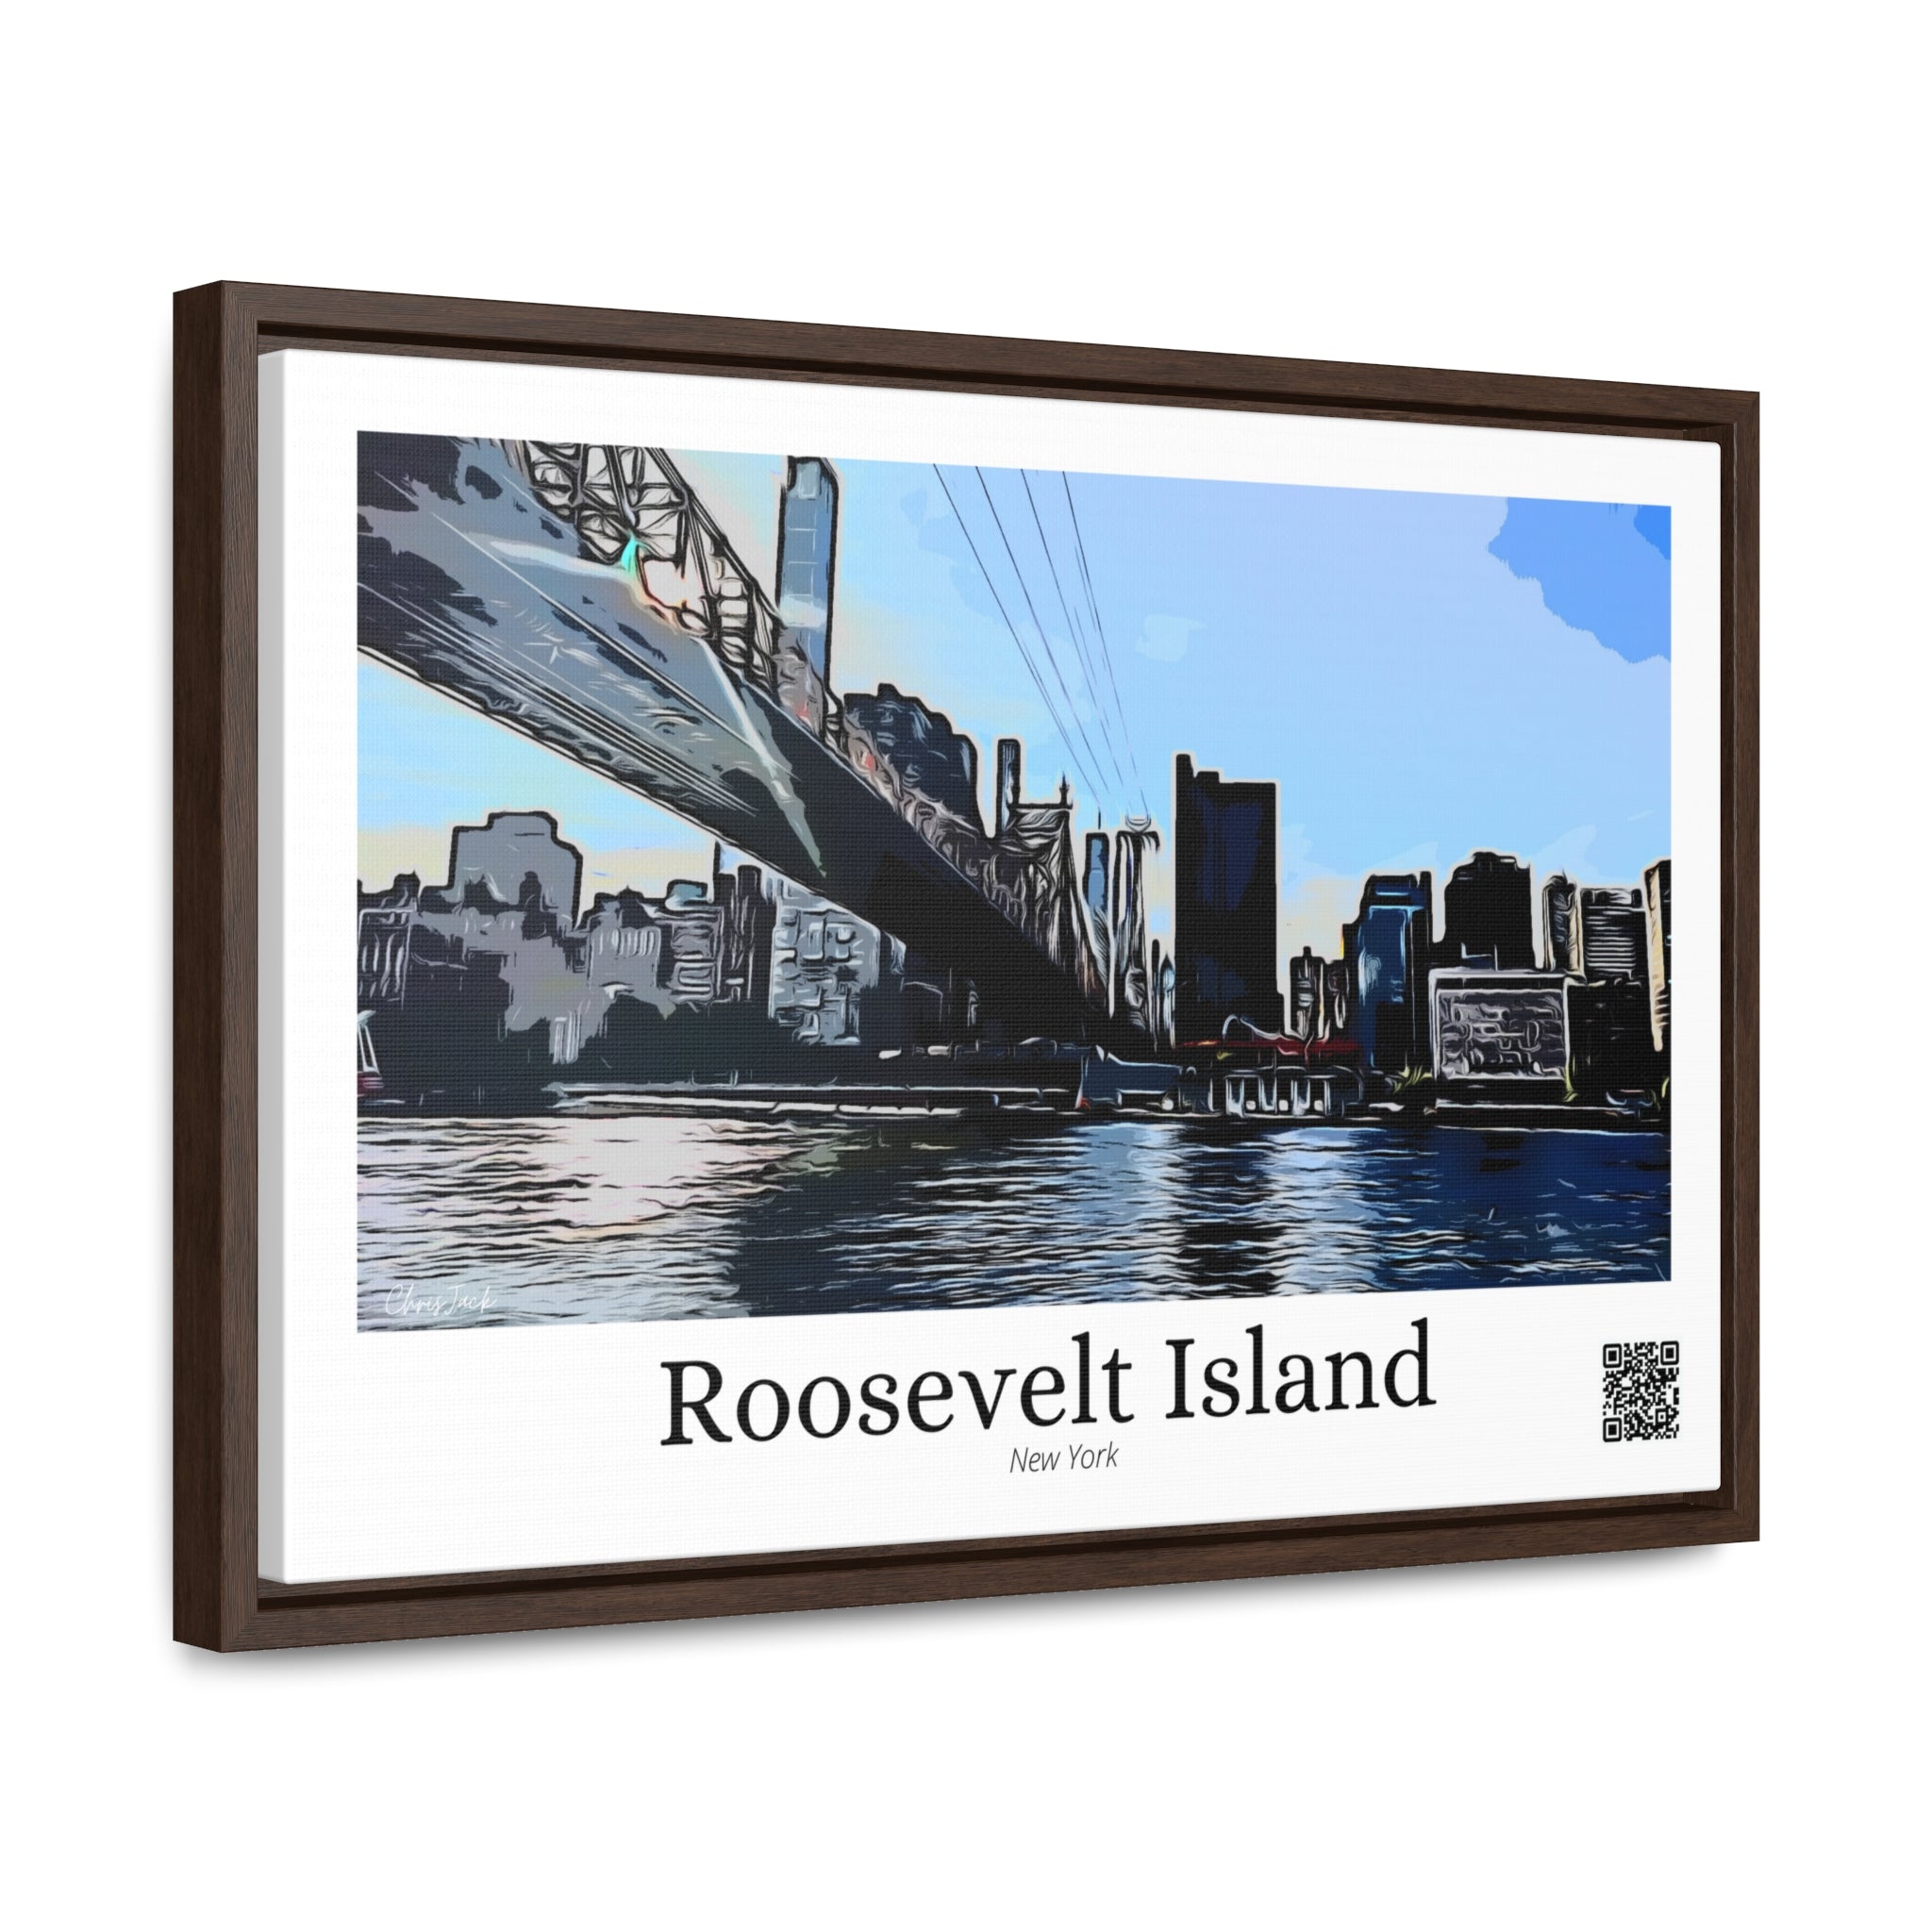 Tranquil Oasis: The Queensboro Bridge from Roosevelt Island